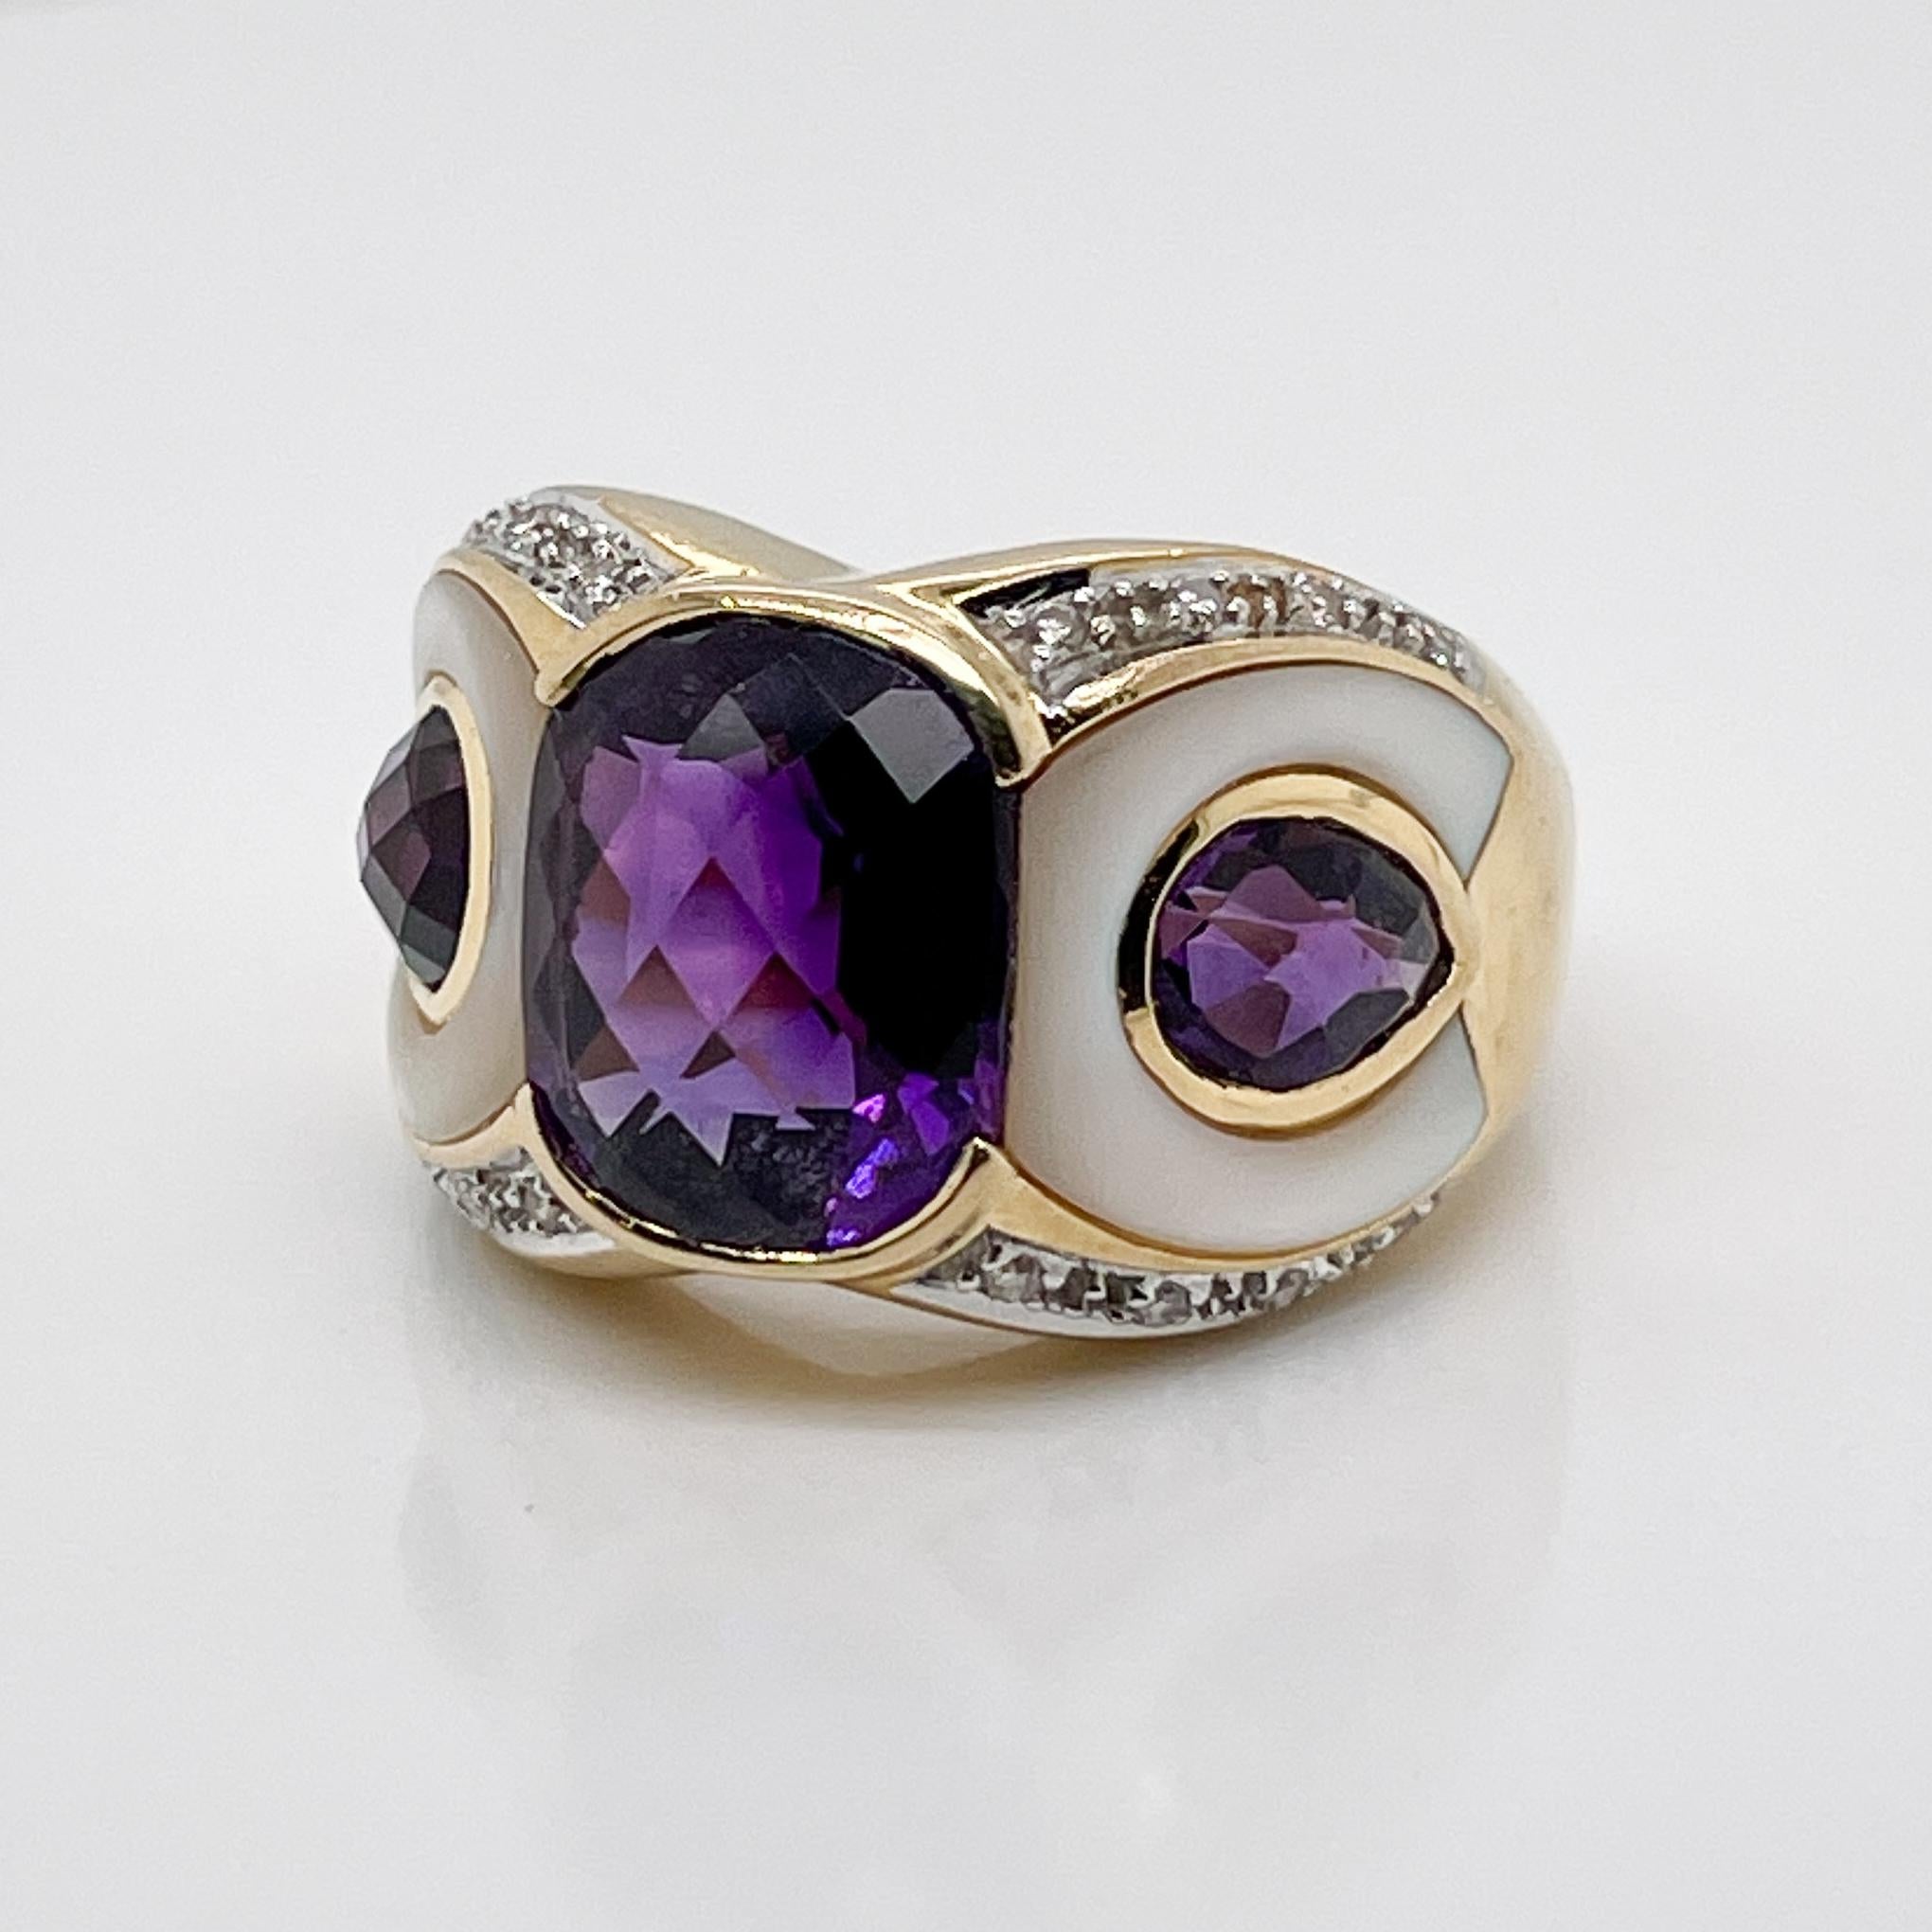 Retro Owl/Parrot Bird Cocktail Ring in 18k Gold, Mother of Pearl, Diamond & Amethyst For Sale